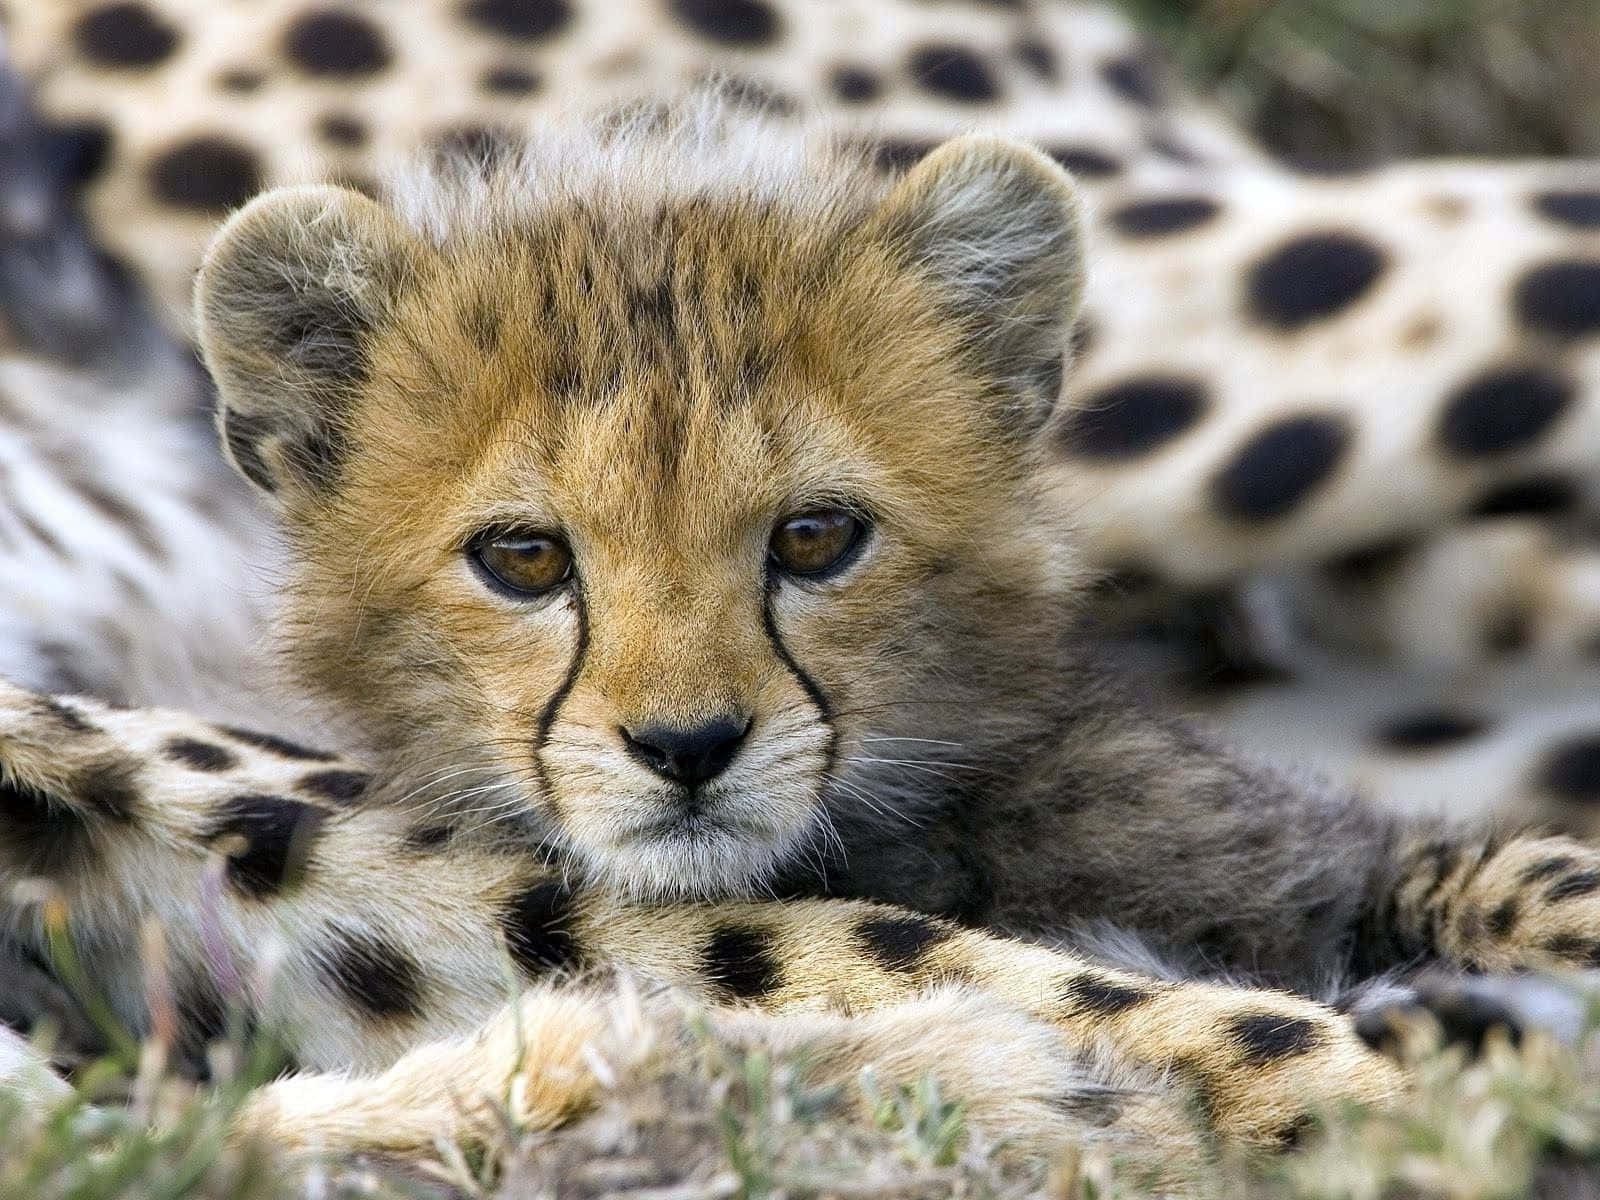 A young Baby Cheetah takes a closer look Wallpaper